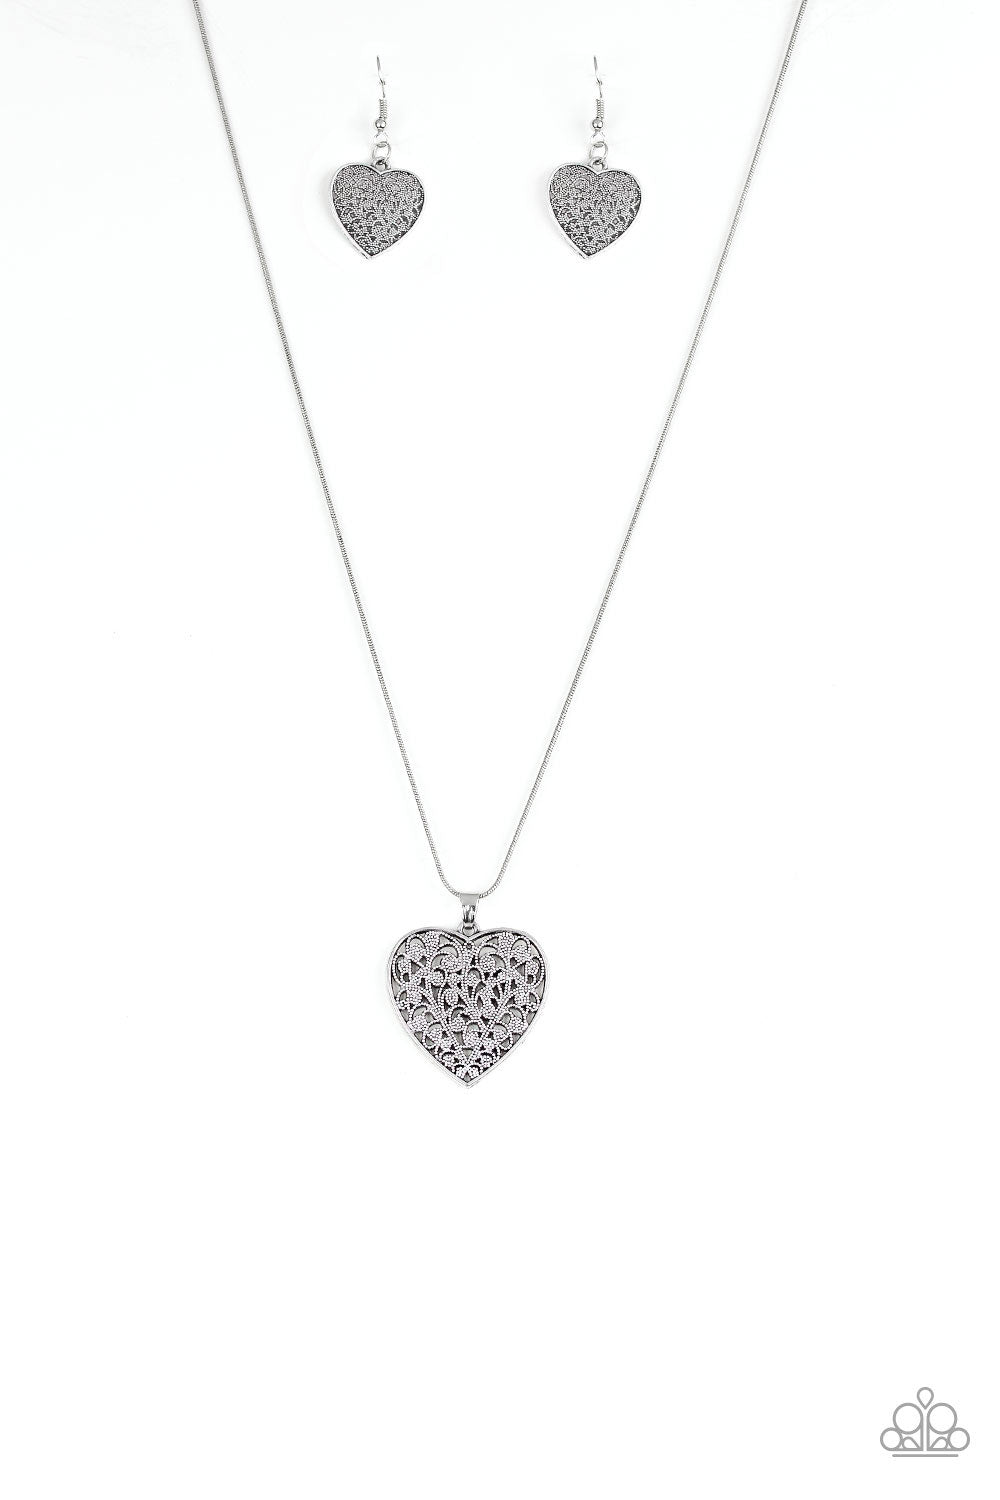 Paparazzi - Filled with vine-like filigree detail, a silver heart pendant swings below the collar for a vintage inspired look. Features an adjustable clasp closure.